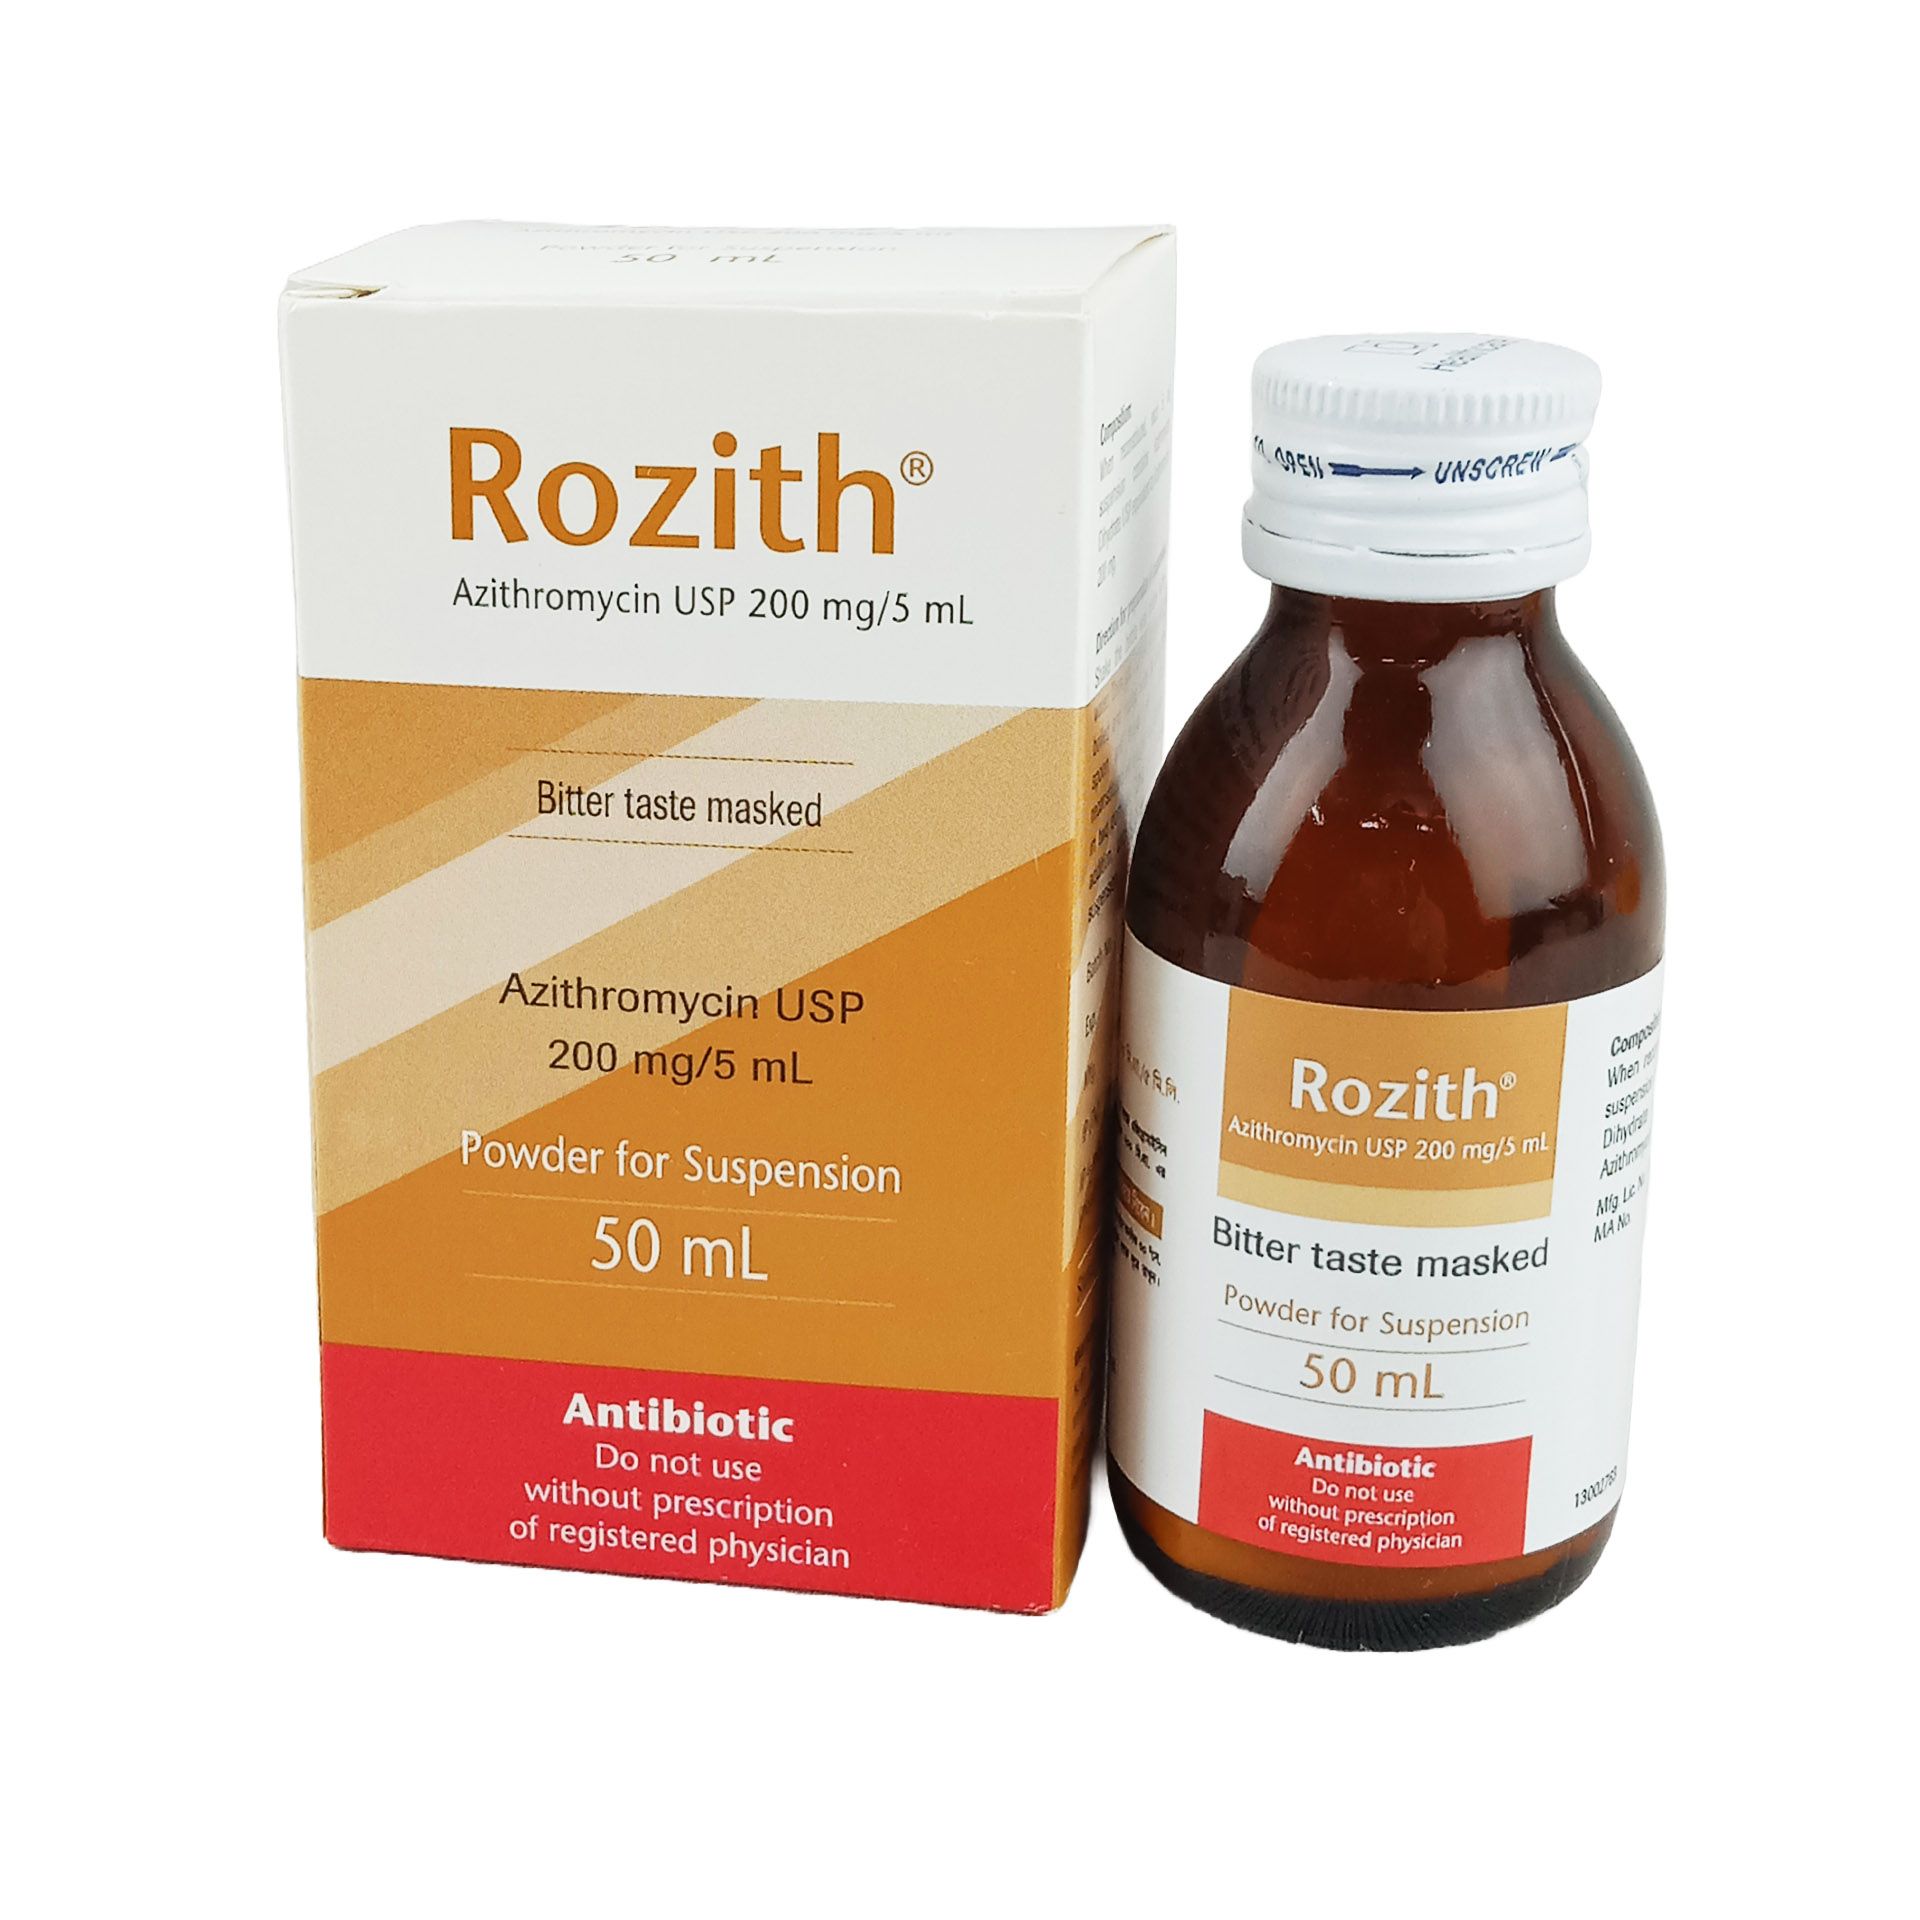 Rozith 200mg/5ml Powder for Suspension